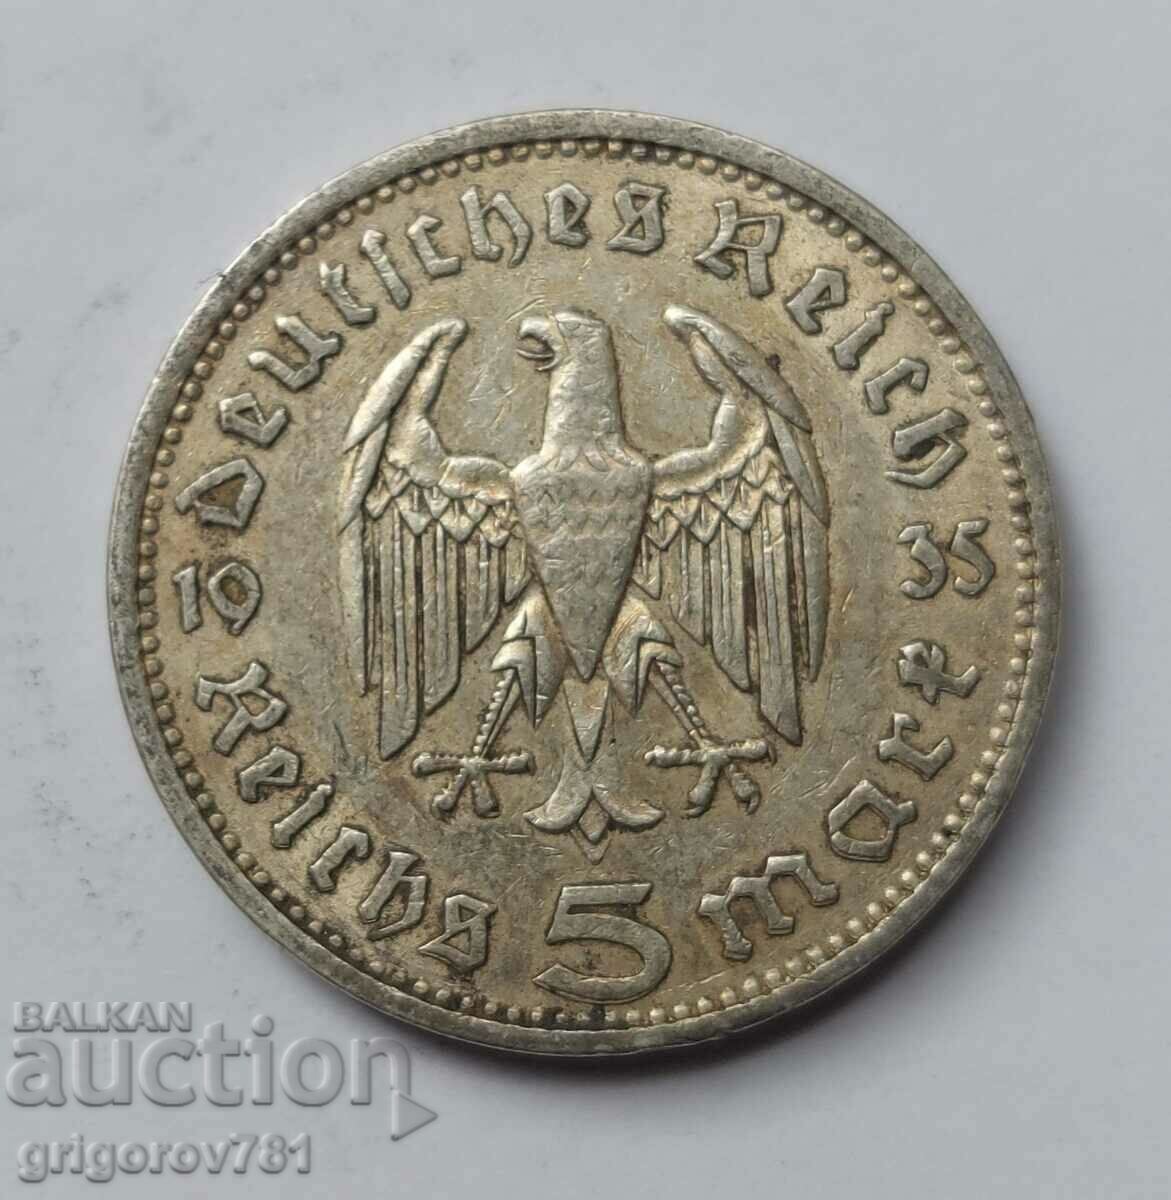 5 Mark Silver Germany 1935 A III Reich Silver Coin #25